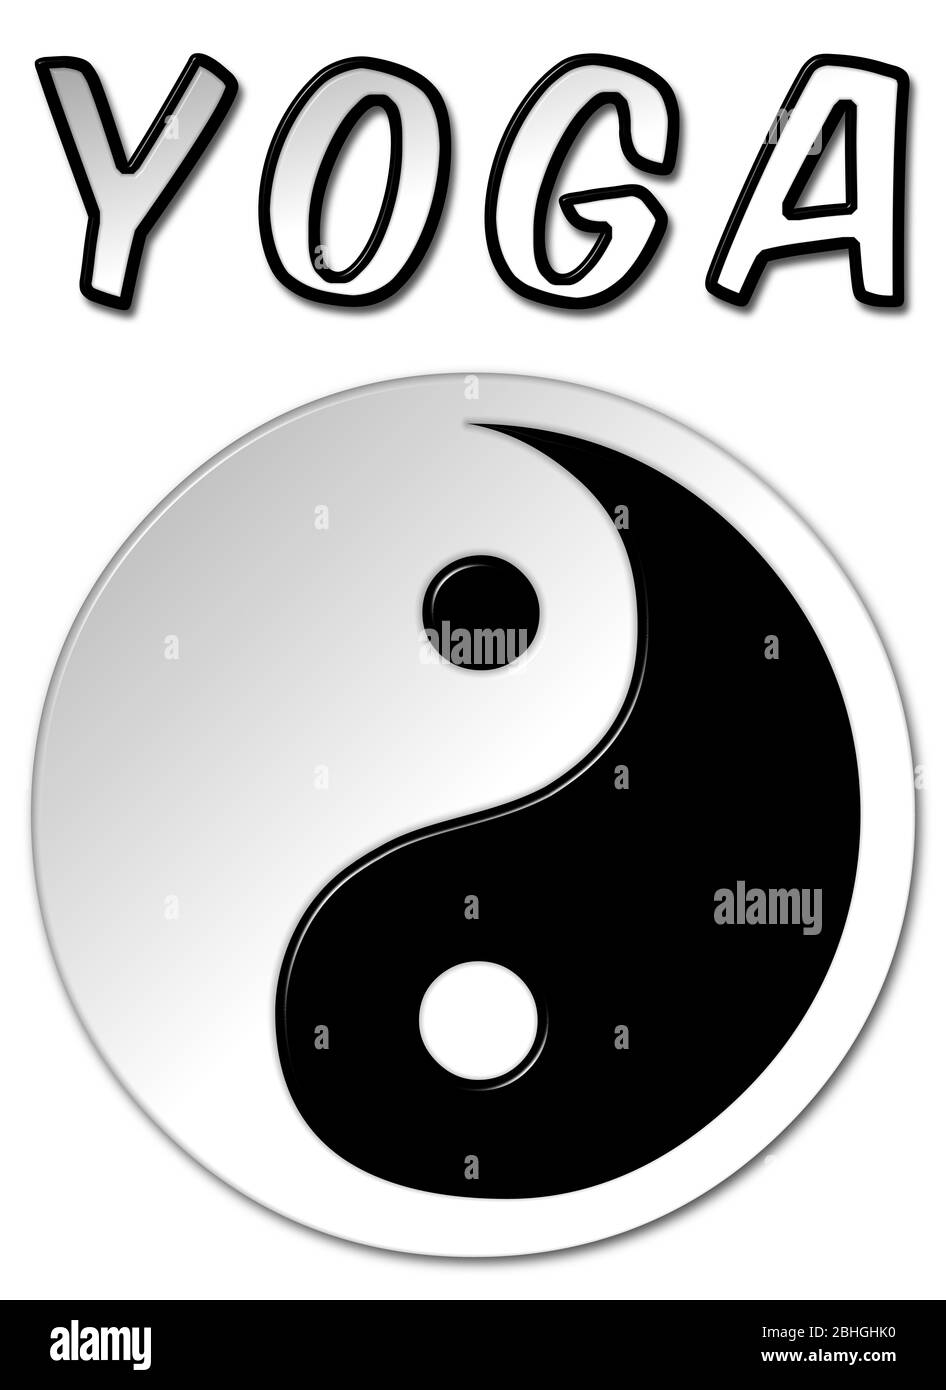 Yoga Yin Yang symbol in black and white with a bevel effect on an isolated white background Stock Photo